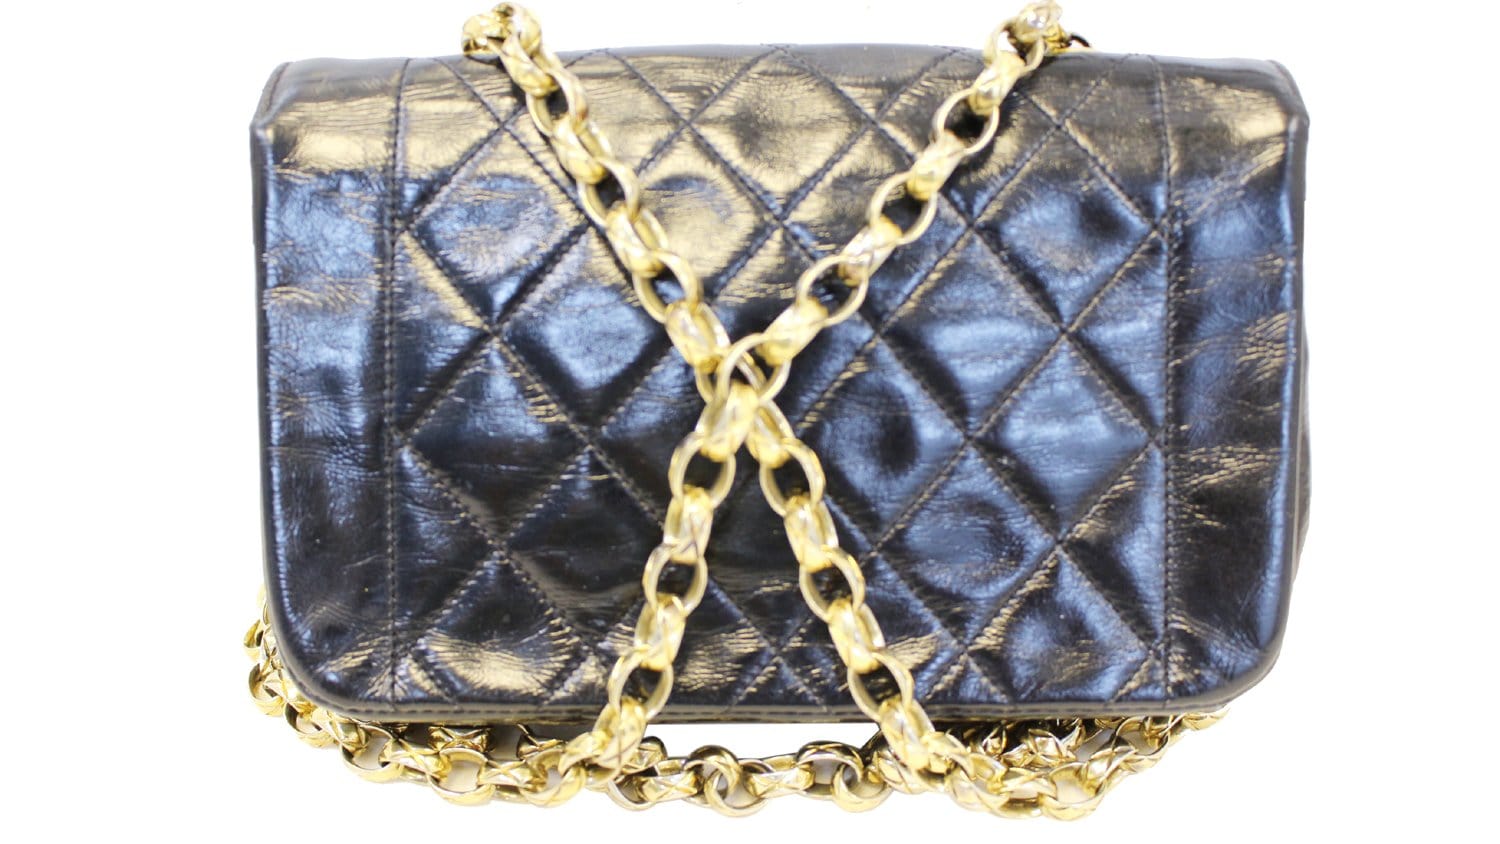 Chanel 1990s Diana Single Flap Bag with Gold Plated Hardware · INTO